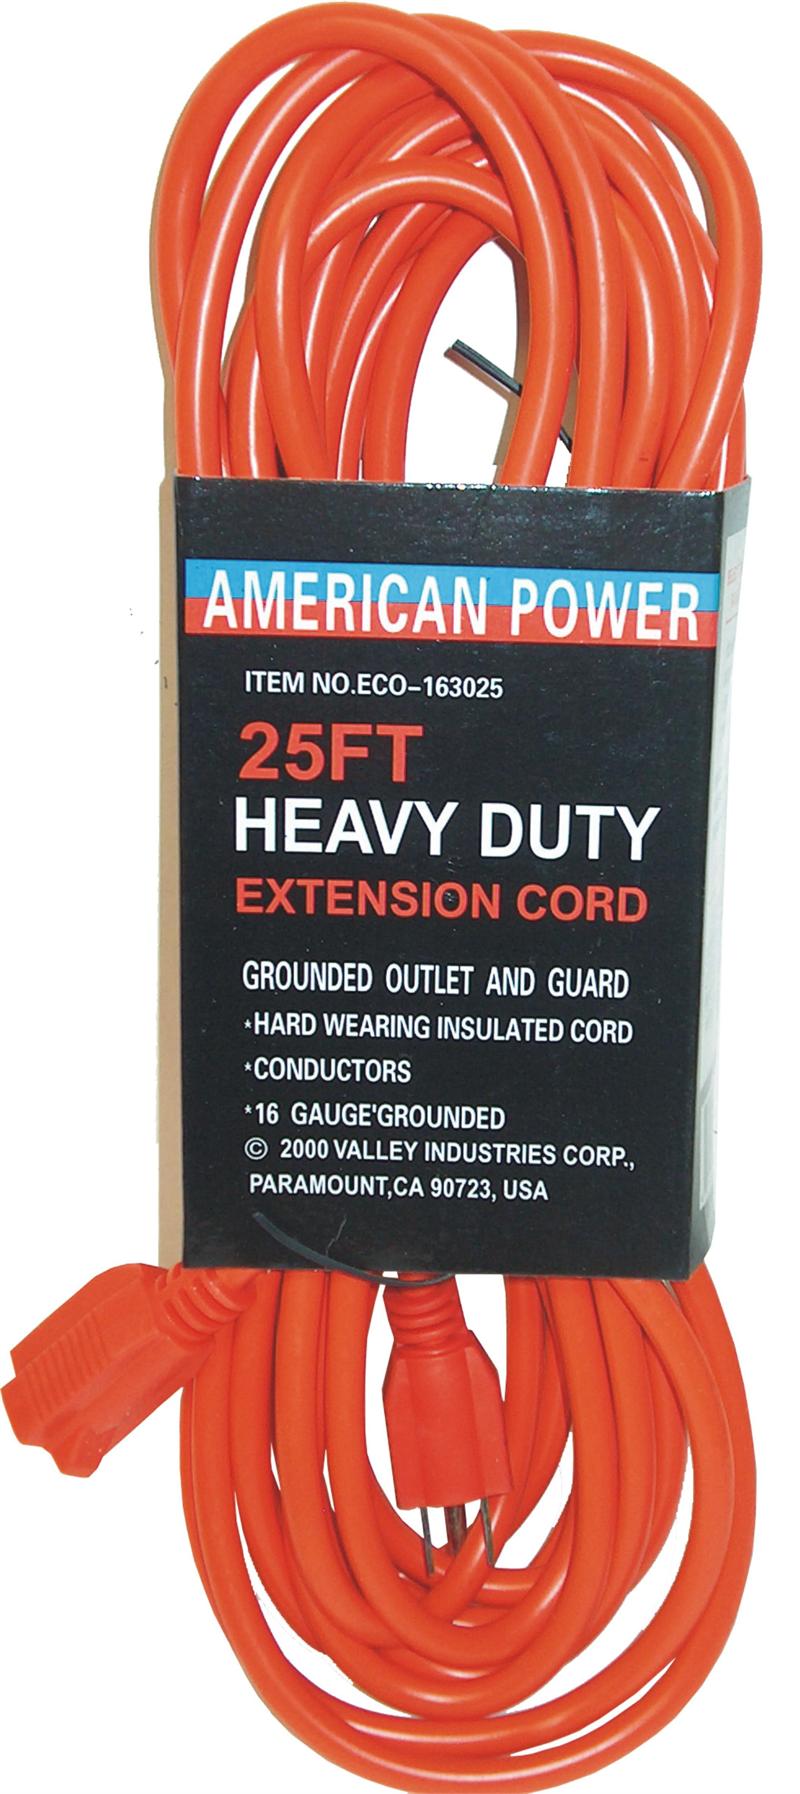 25' Heavy Duty Extension Cord 16/3 *UL LISTED*